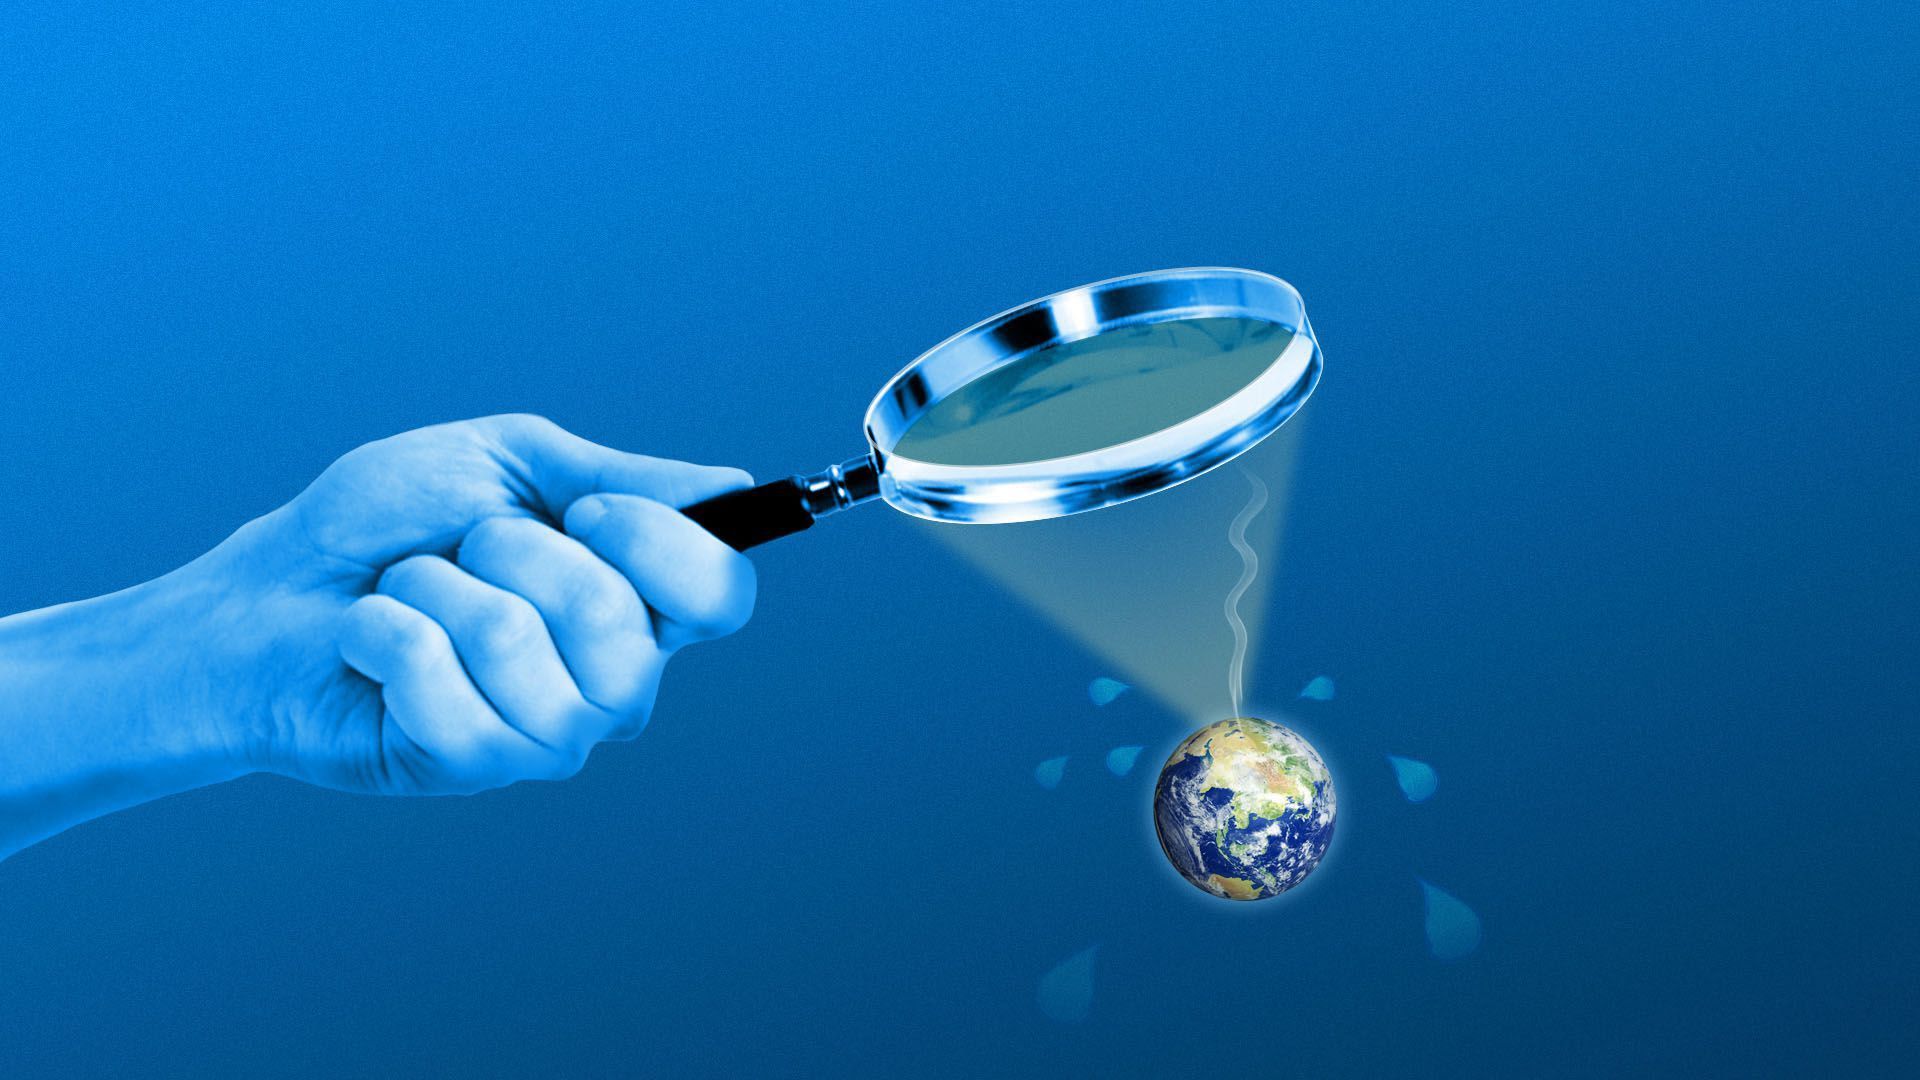 Illustration of a hand holding a magnifying glass over a tiny earth, burning it.